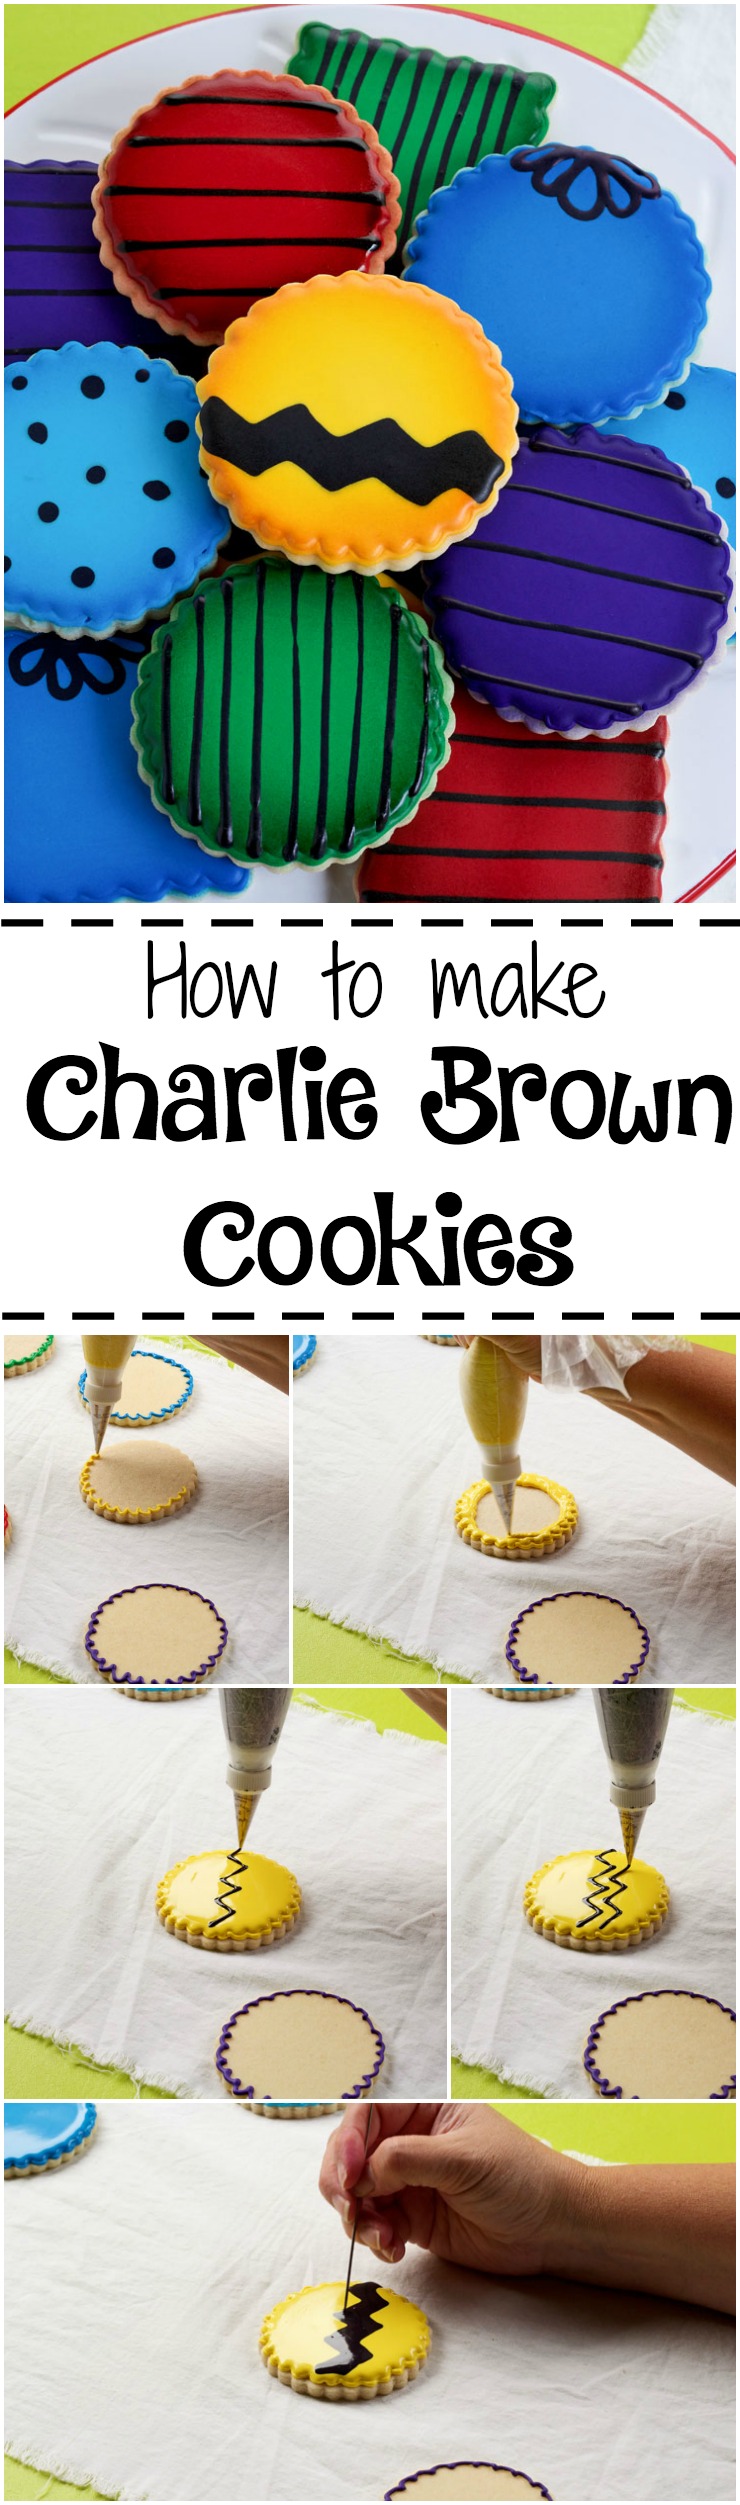 How to Make Charlie Brown Cookies with a How to Video | The Bearfoot Baker